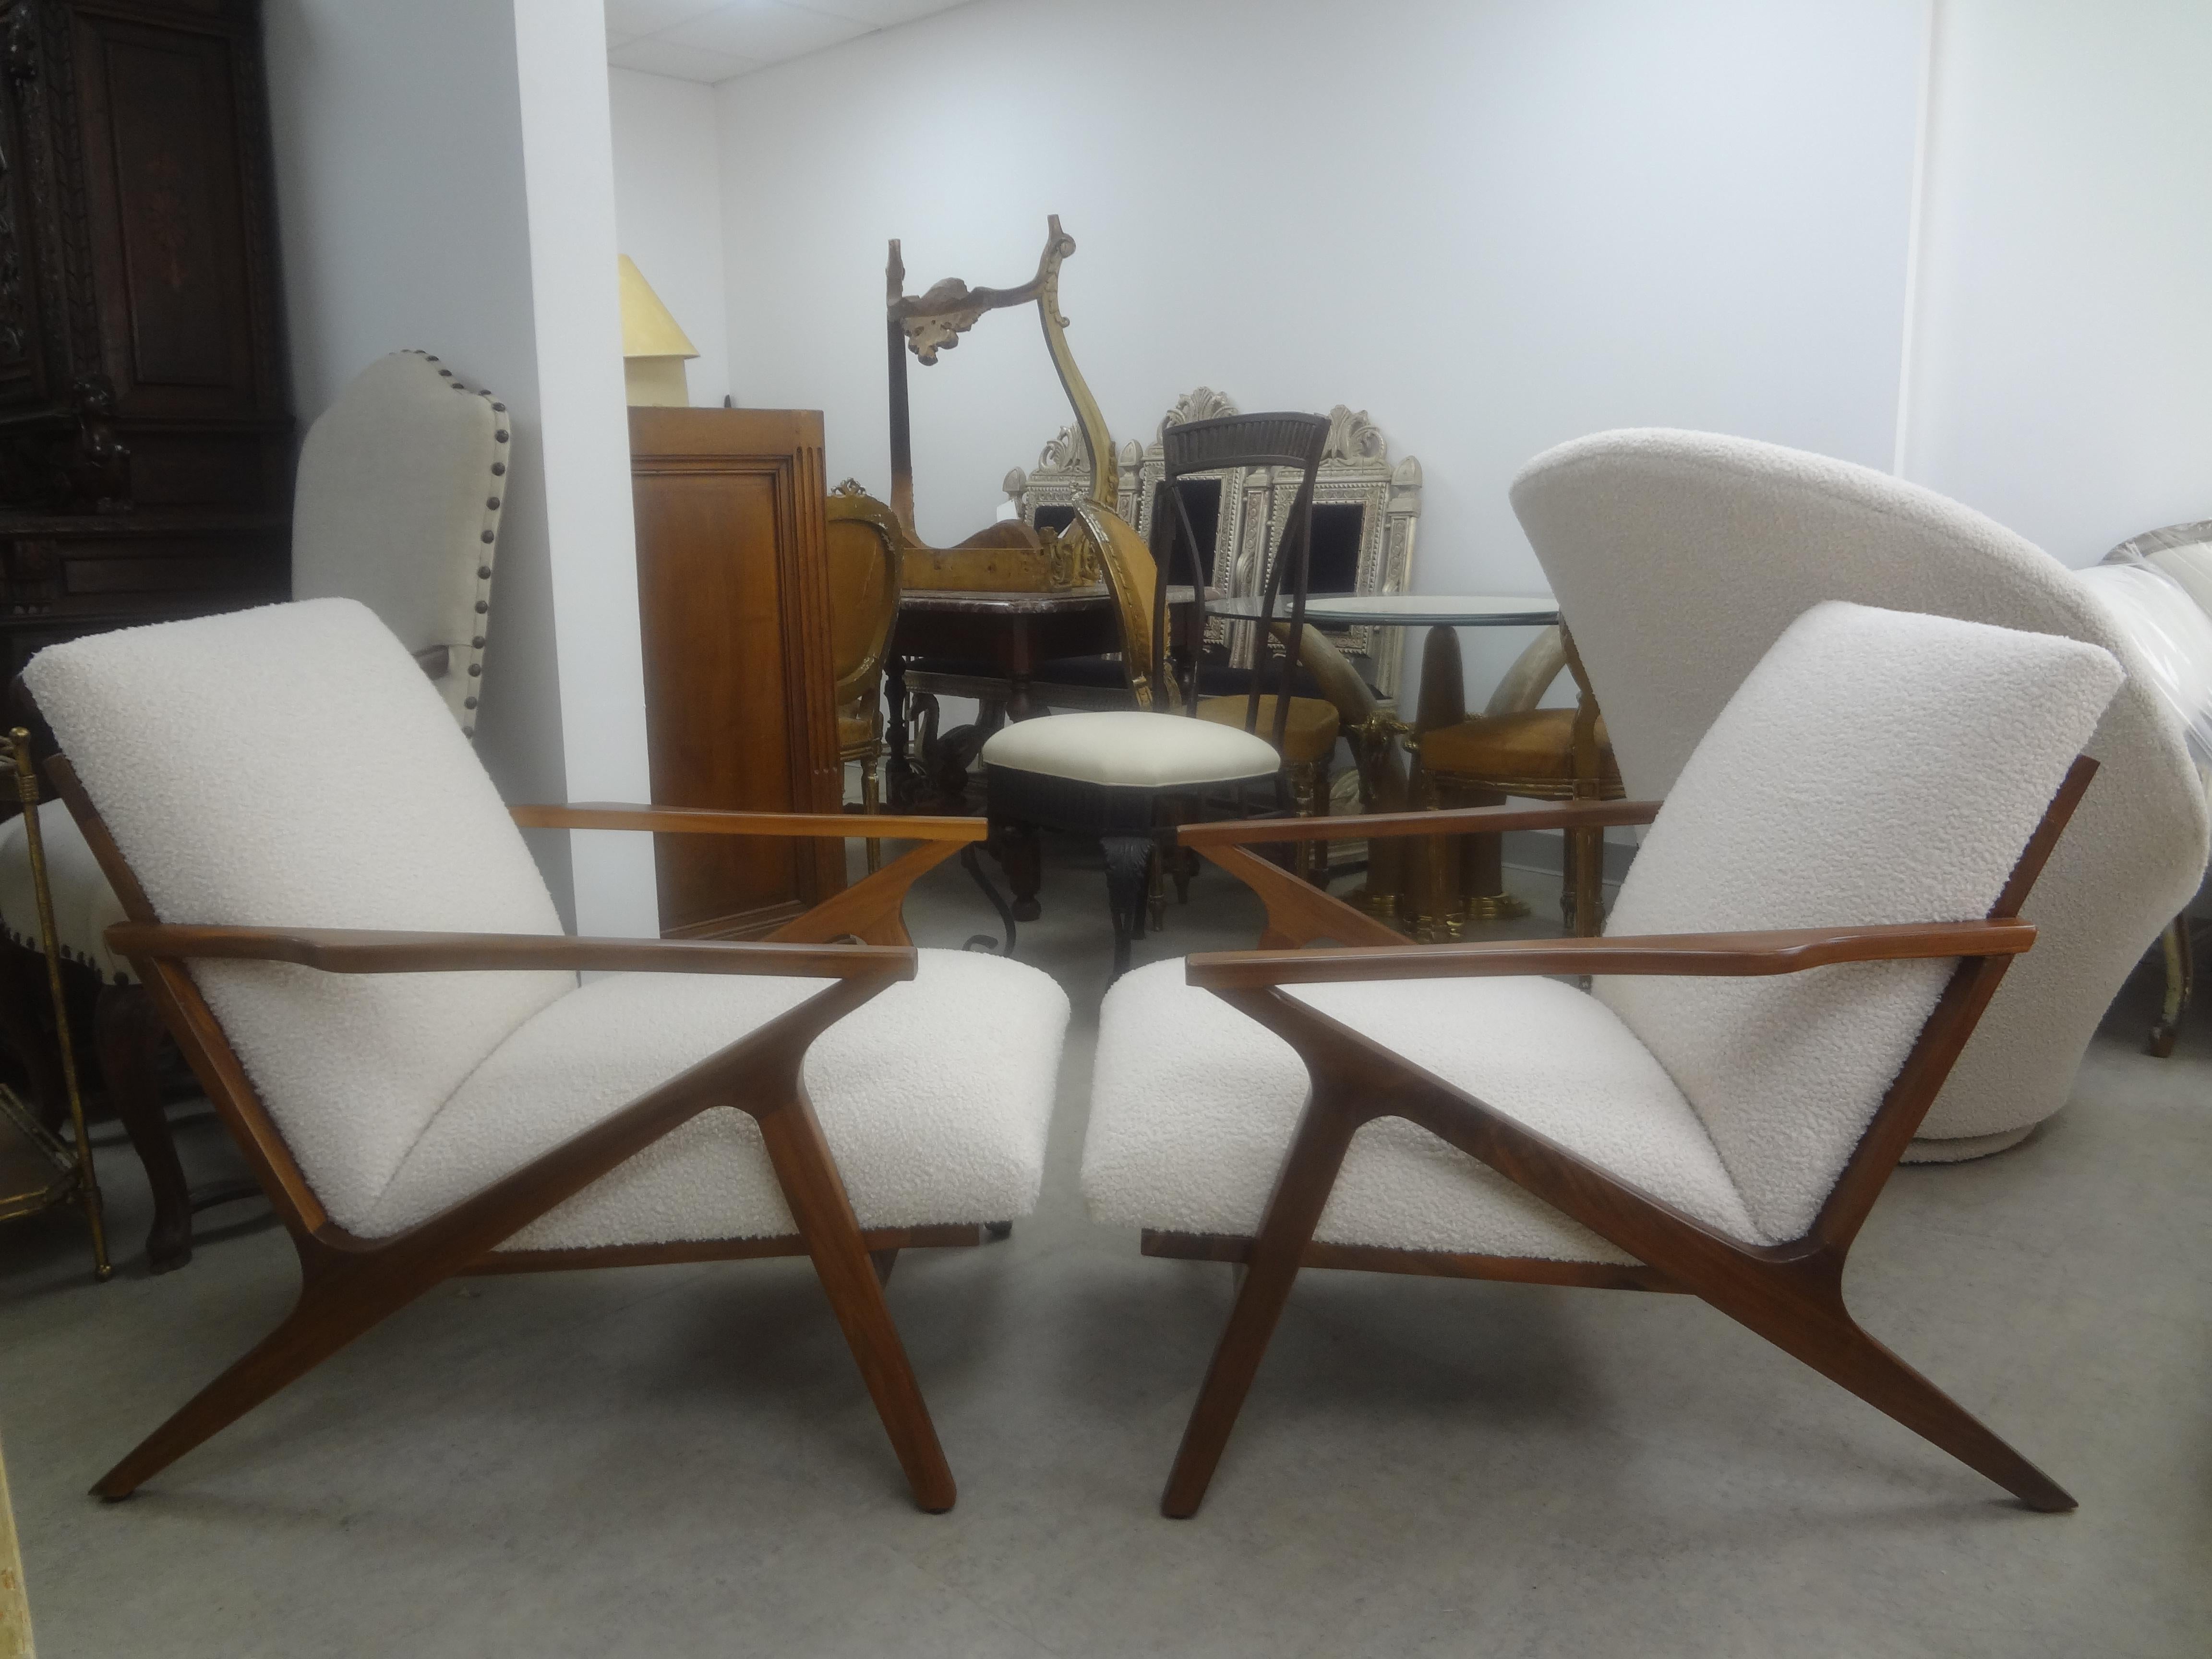 Pair of French Mid-Century Modern Jeanneret Style Lounge Chairs.
These stunning French Modernist lounge chairs are an interesting design and extremely comfortable. Professionally upholstered in plush cream boucle. In The Manner of Sornay, Arbus,